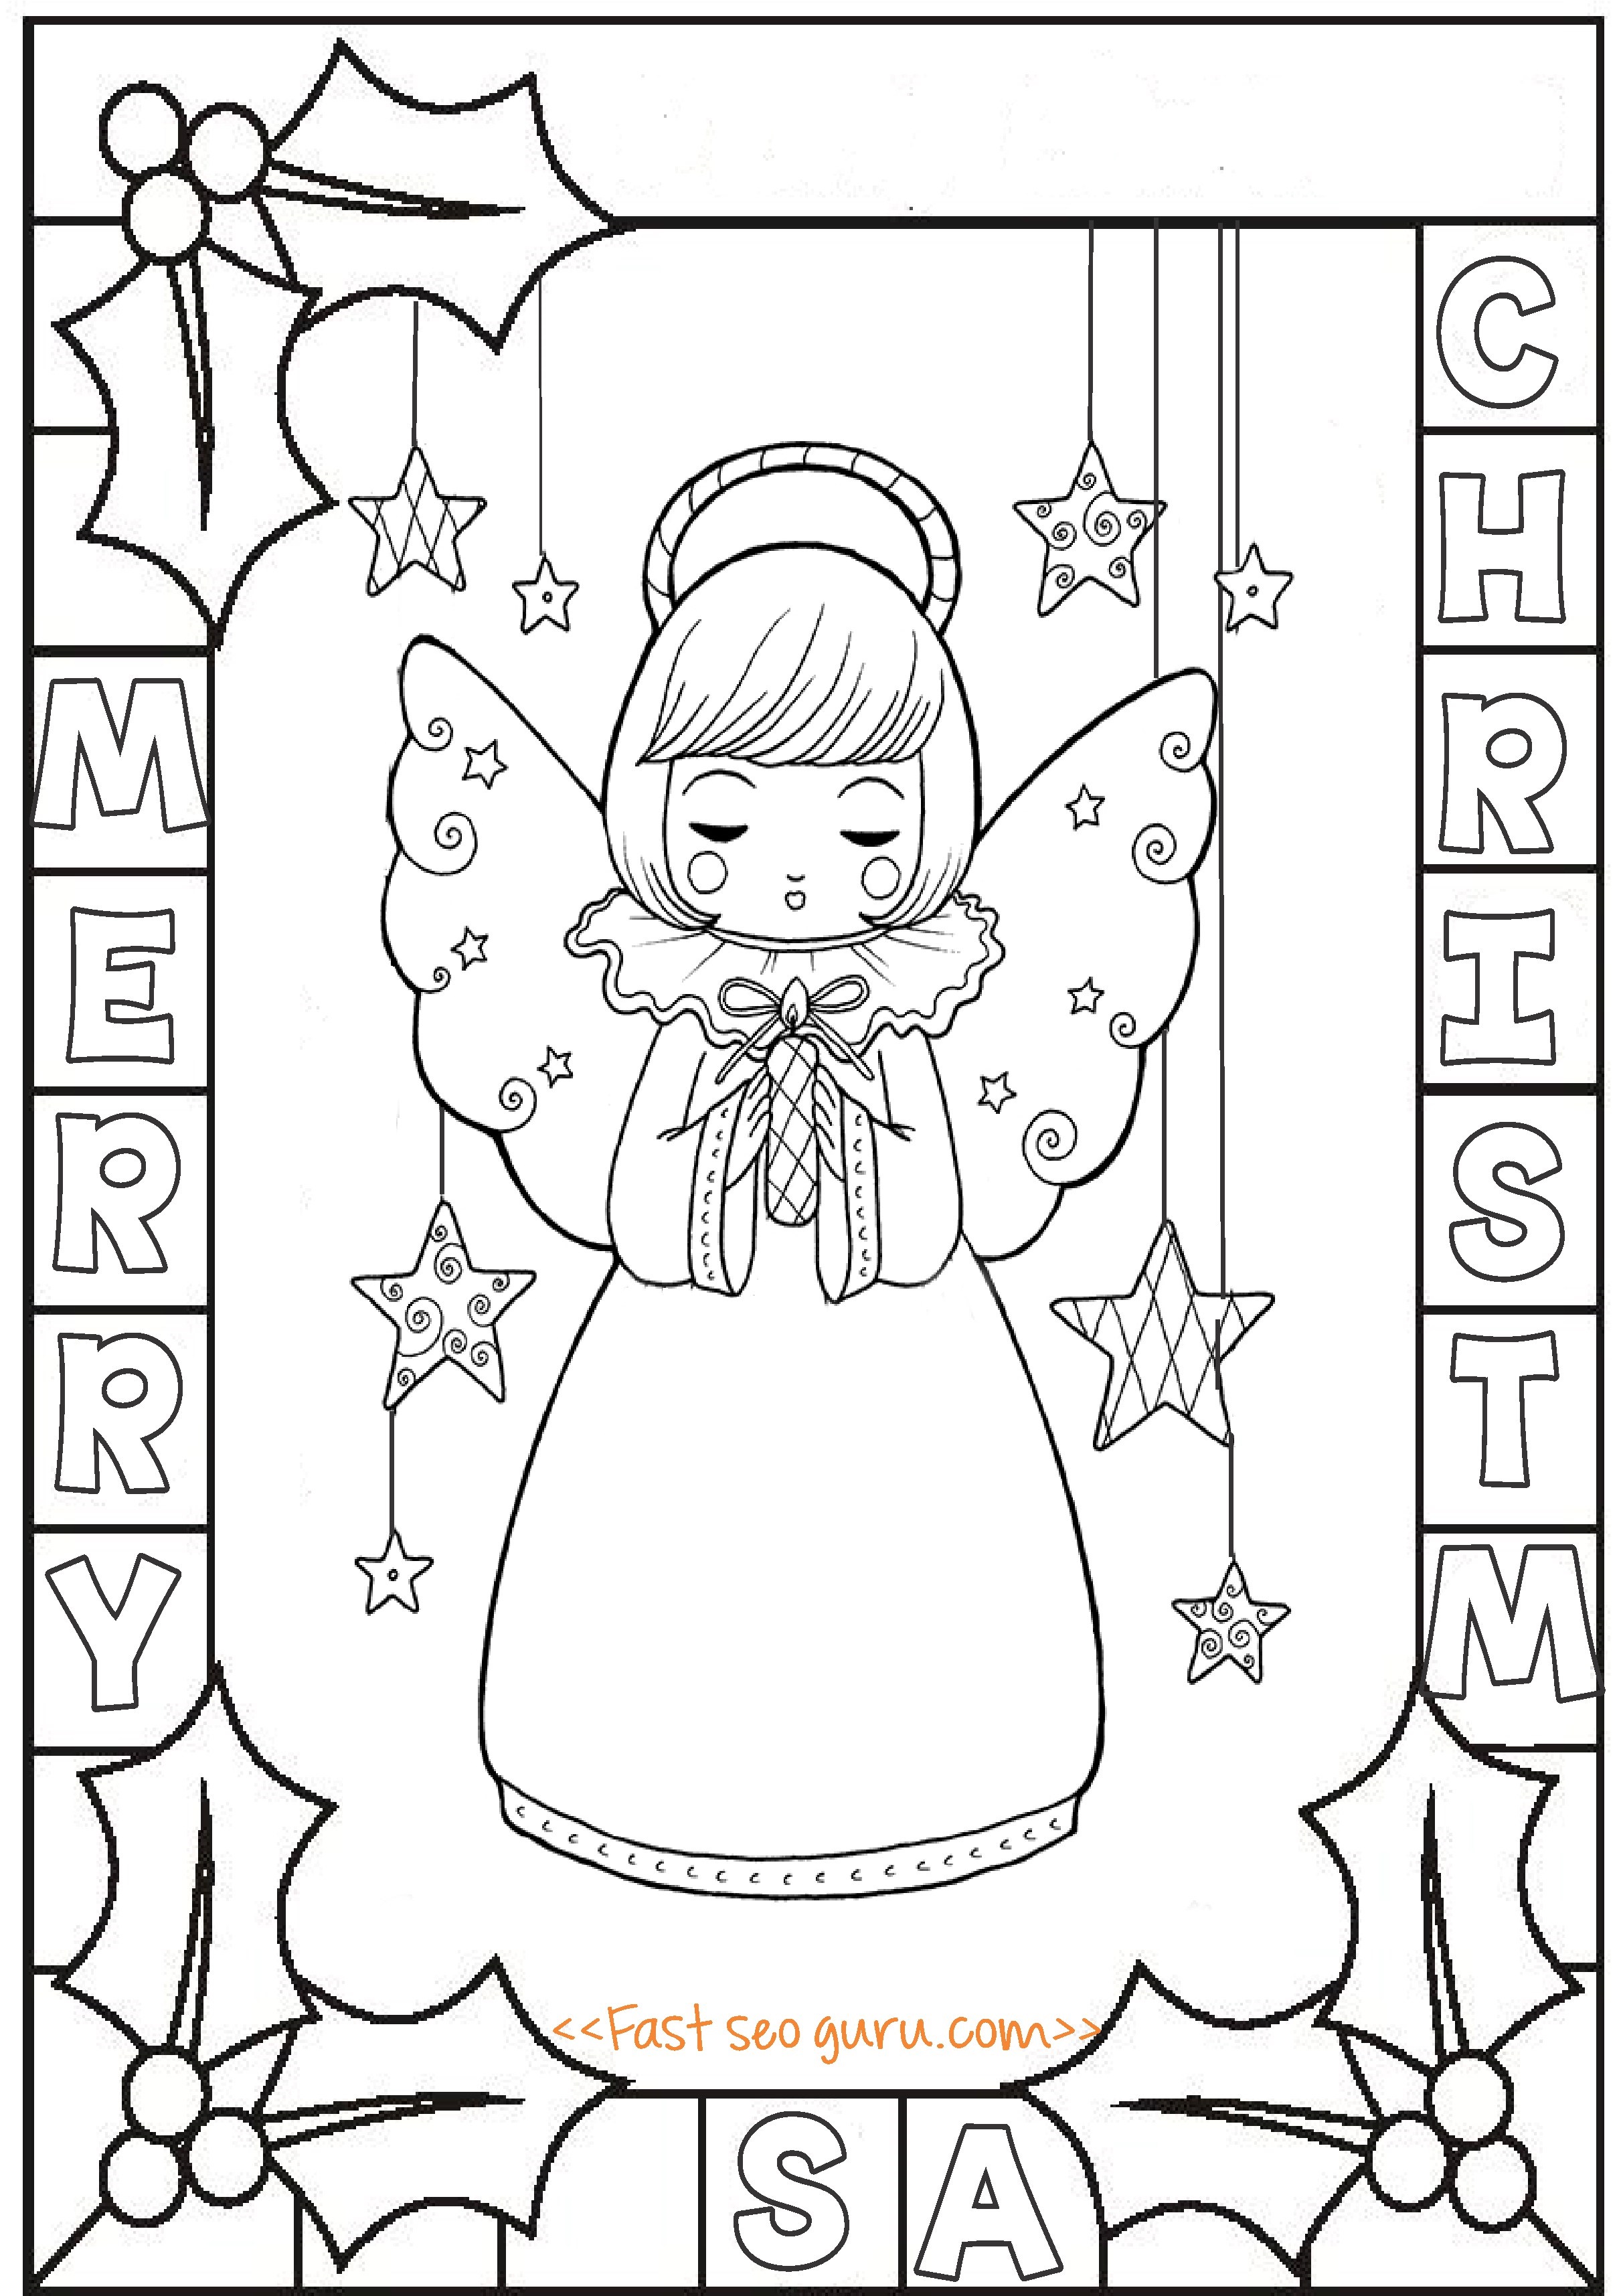 Printable cute angel chirstmas holly leaves coloring pages